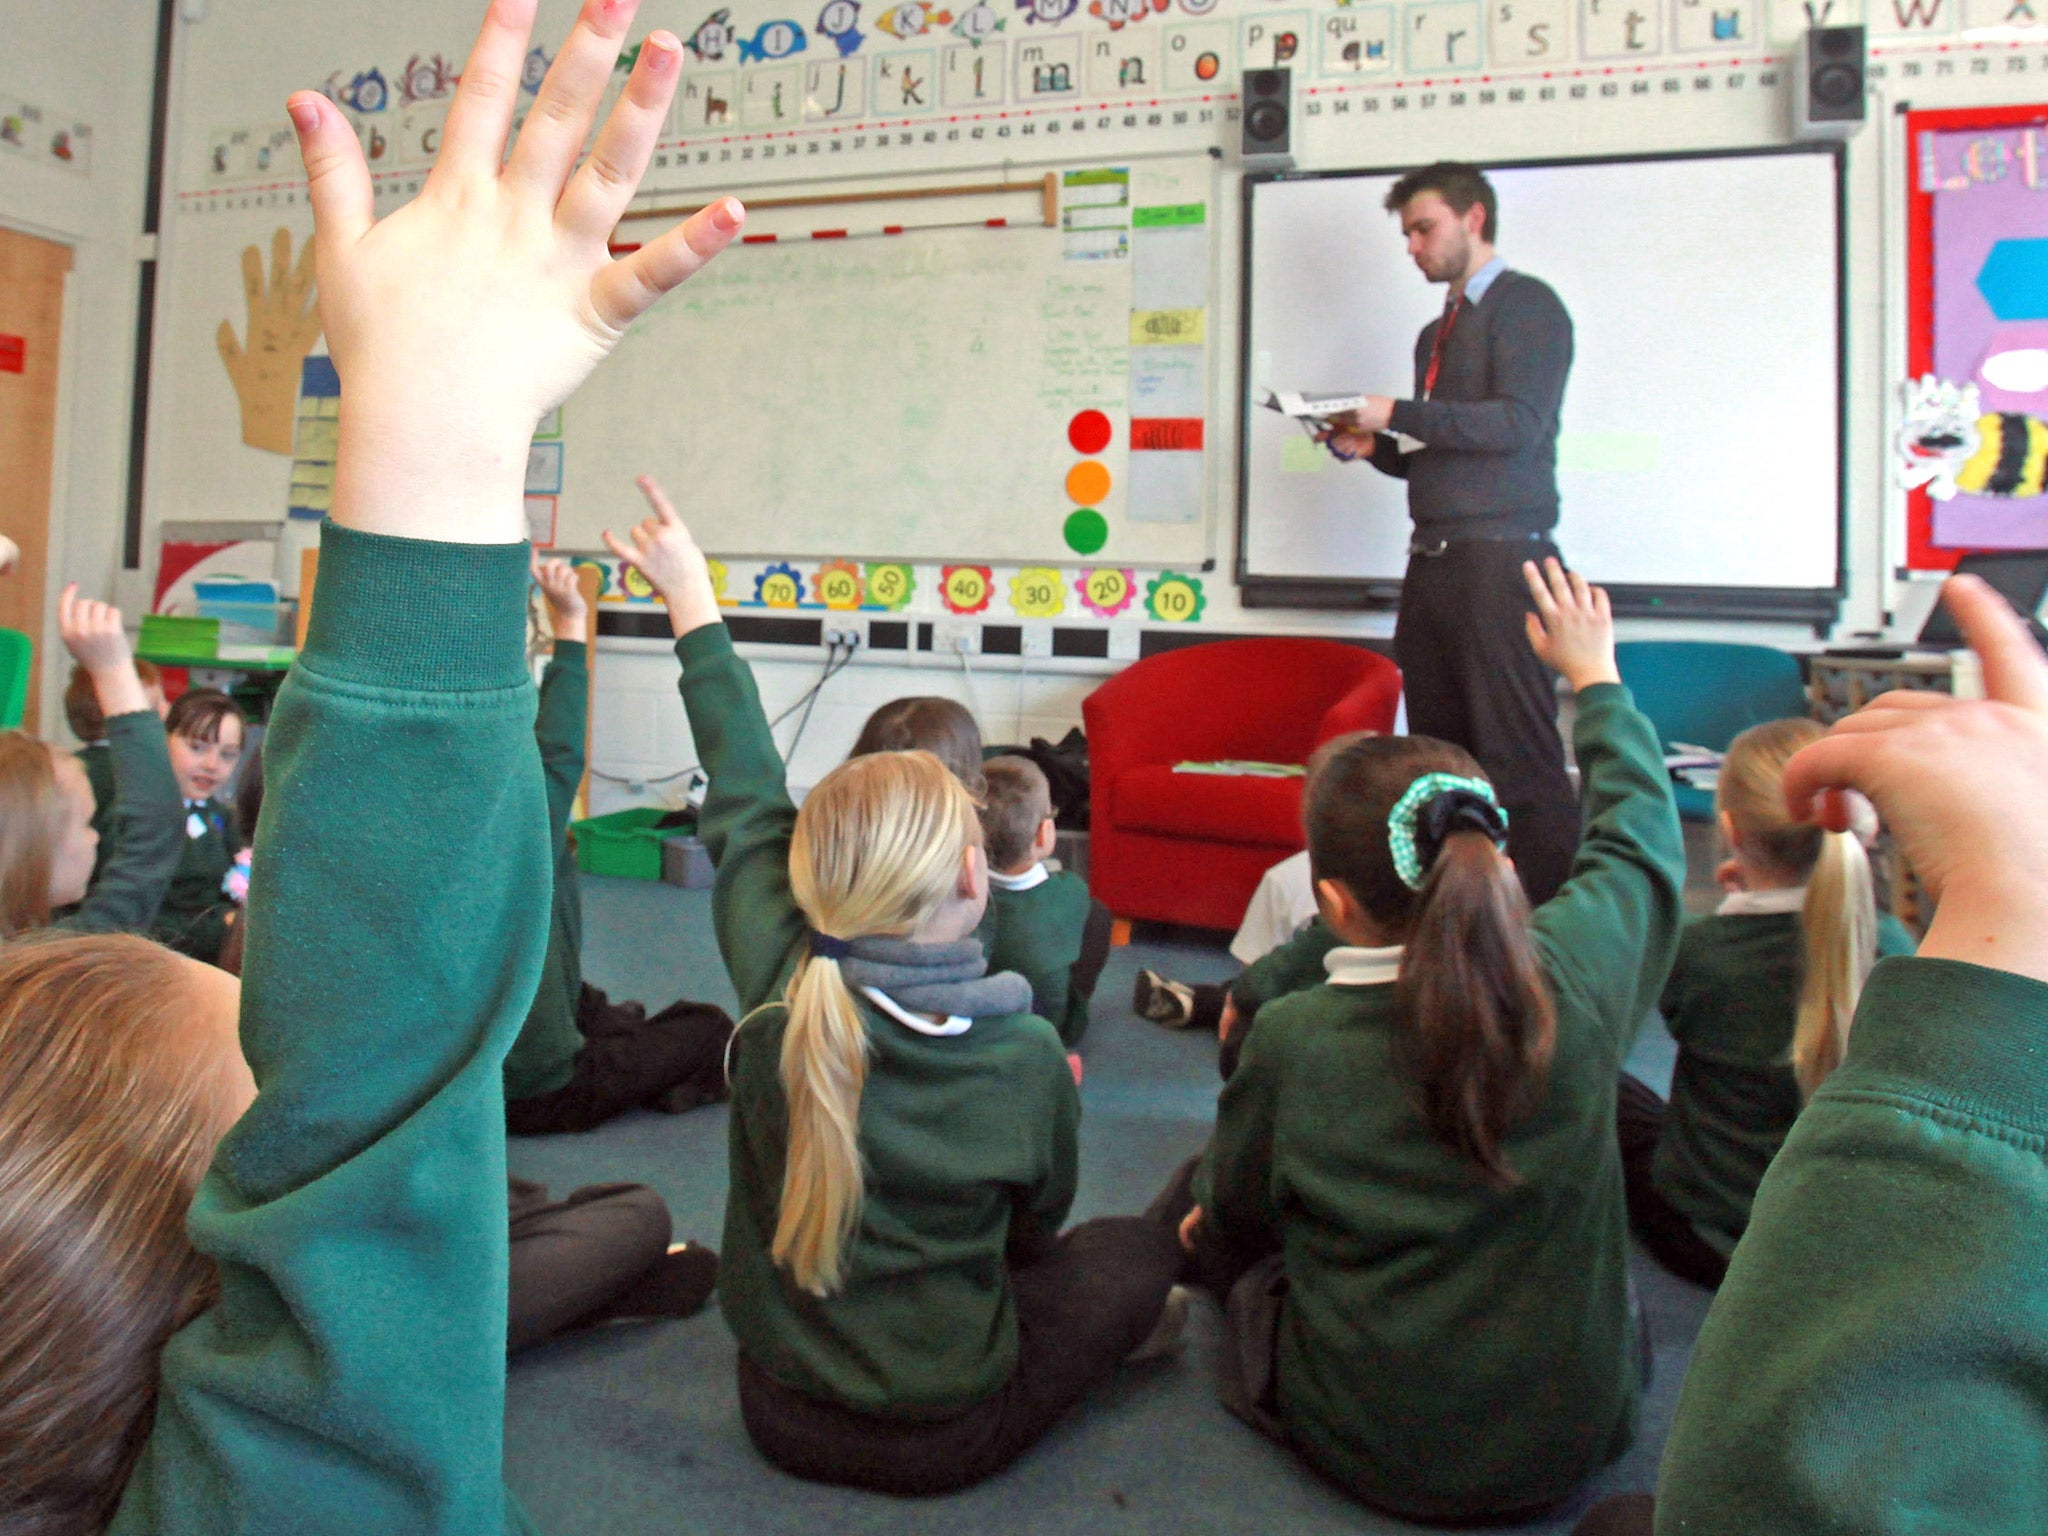 Under Labour’s plan, Schools with oversized classes would have a year to bring them down to 30